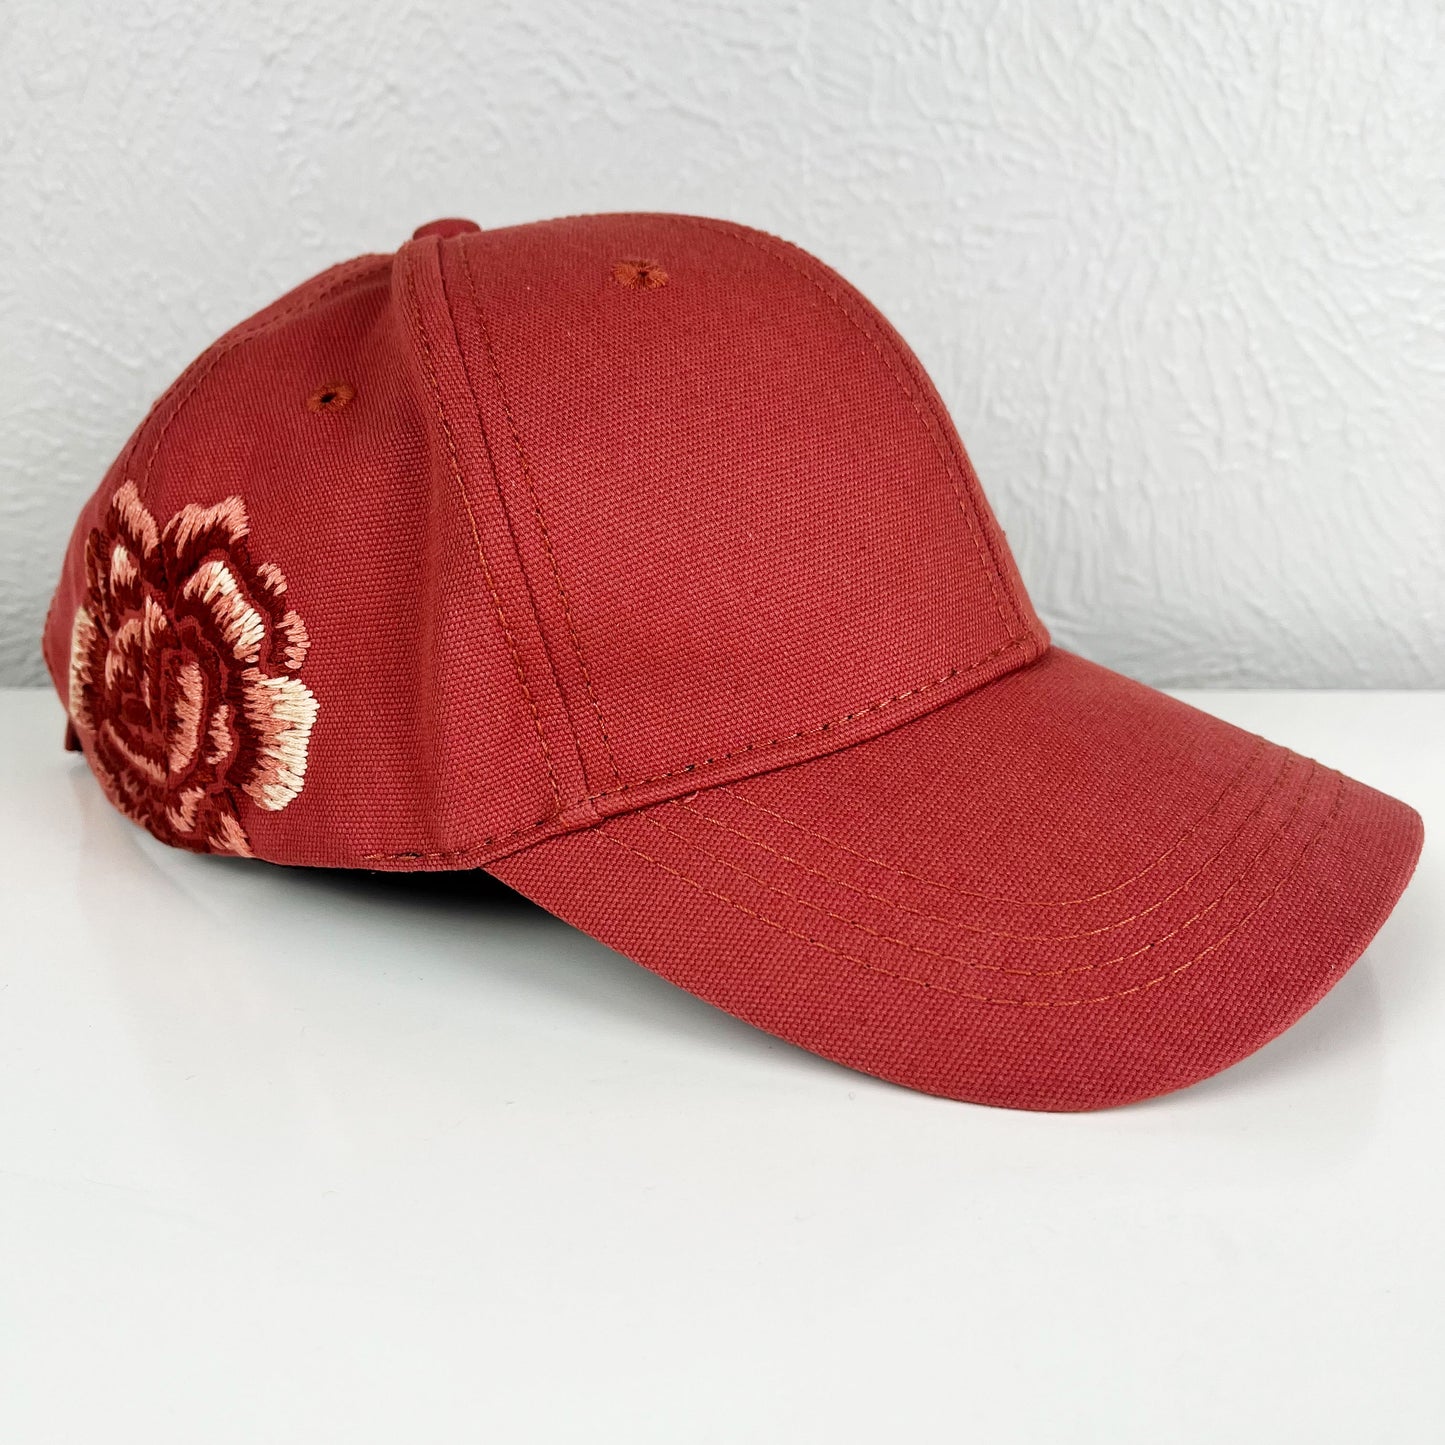 terra cotta colored baseball hat with a large hand embroidered peony on the side, also in shades of terra cotta, sitting at an angle on a white dresser